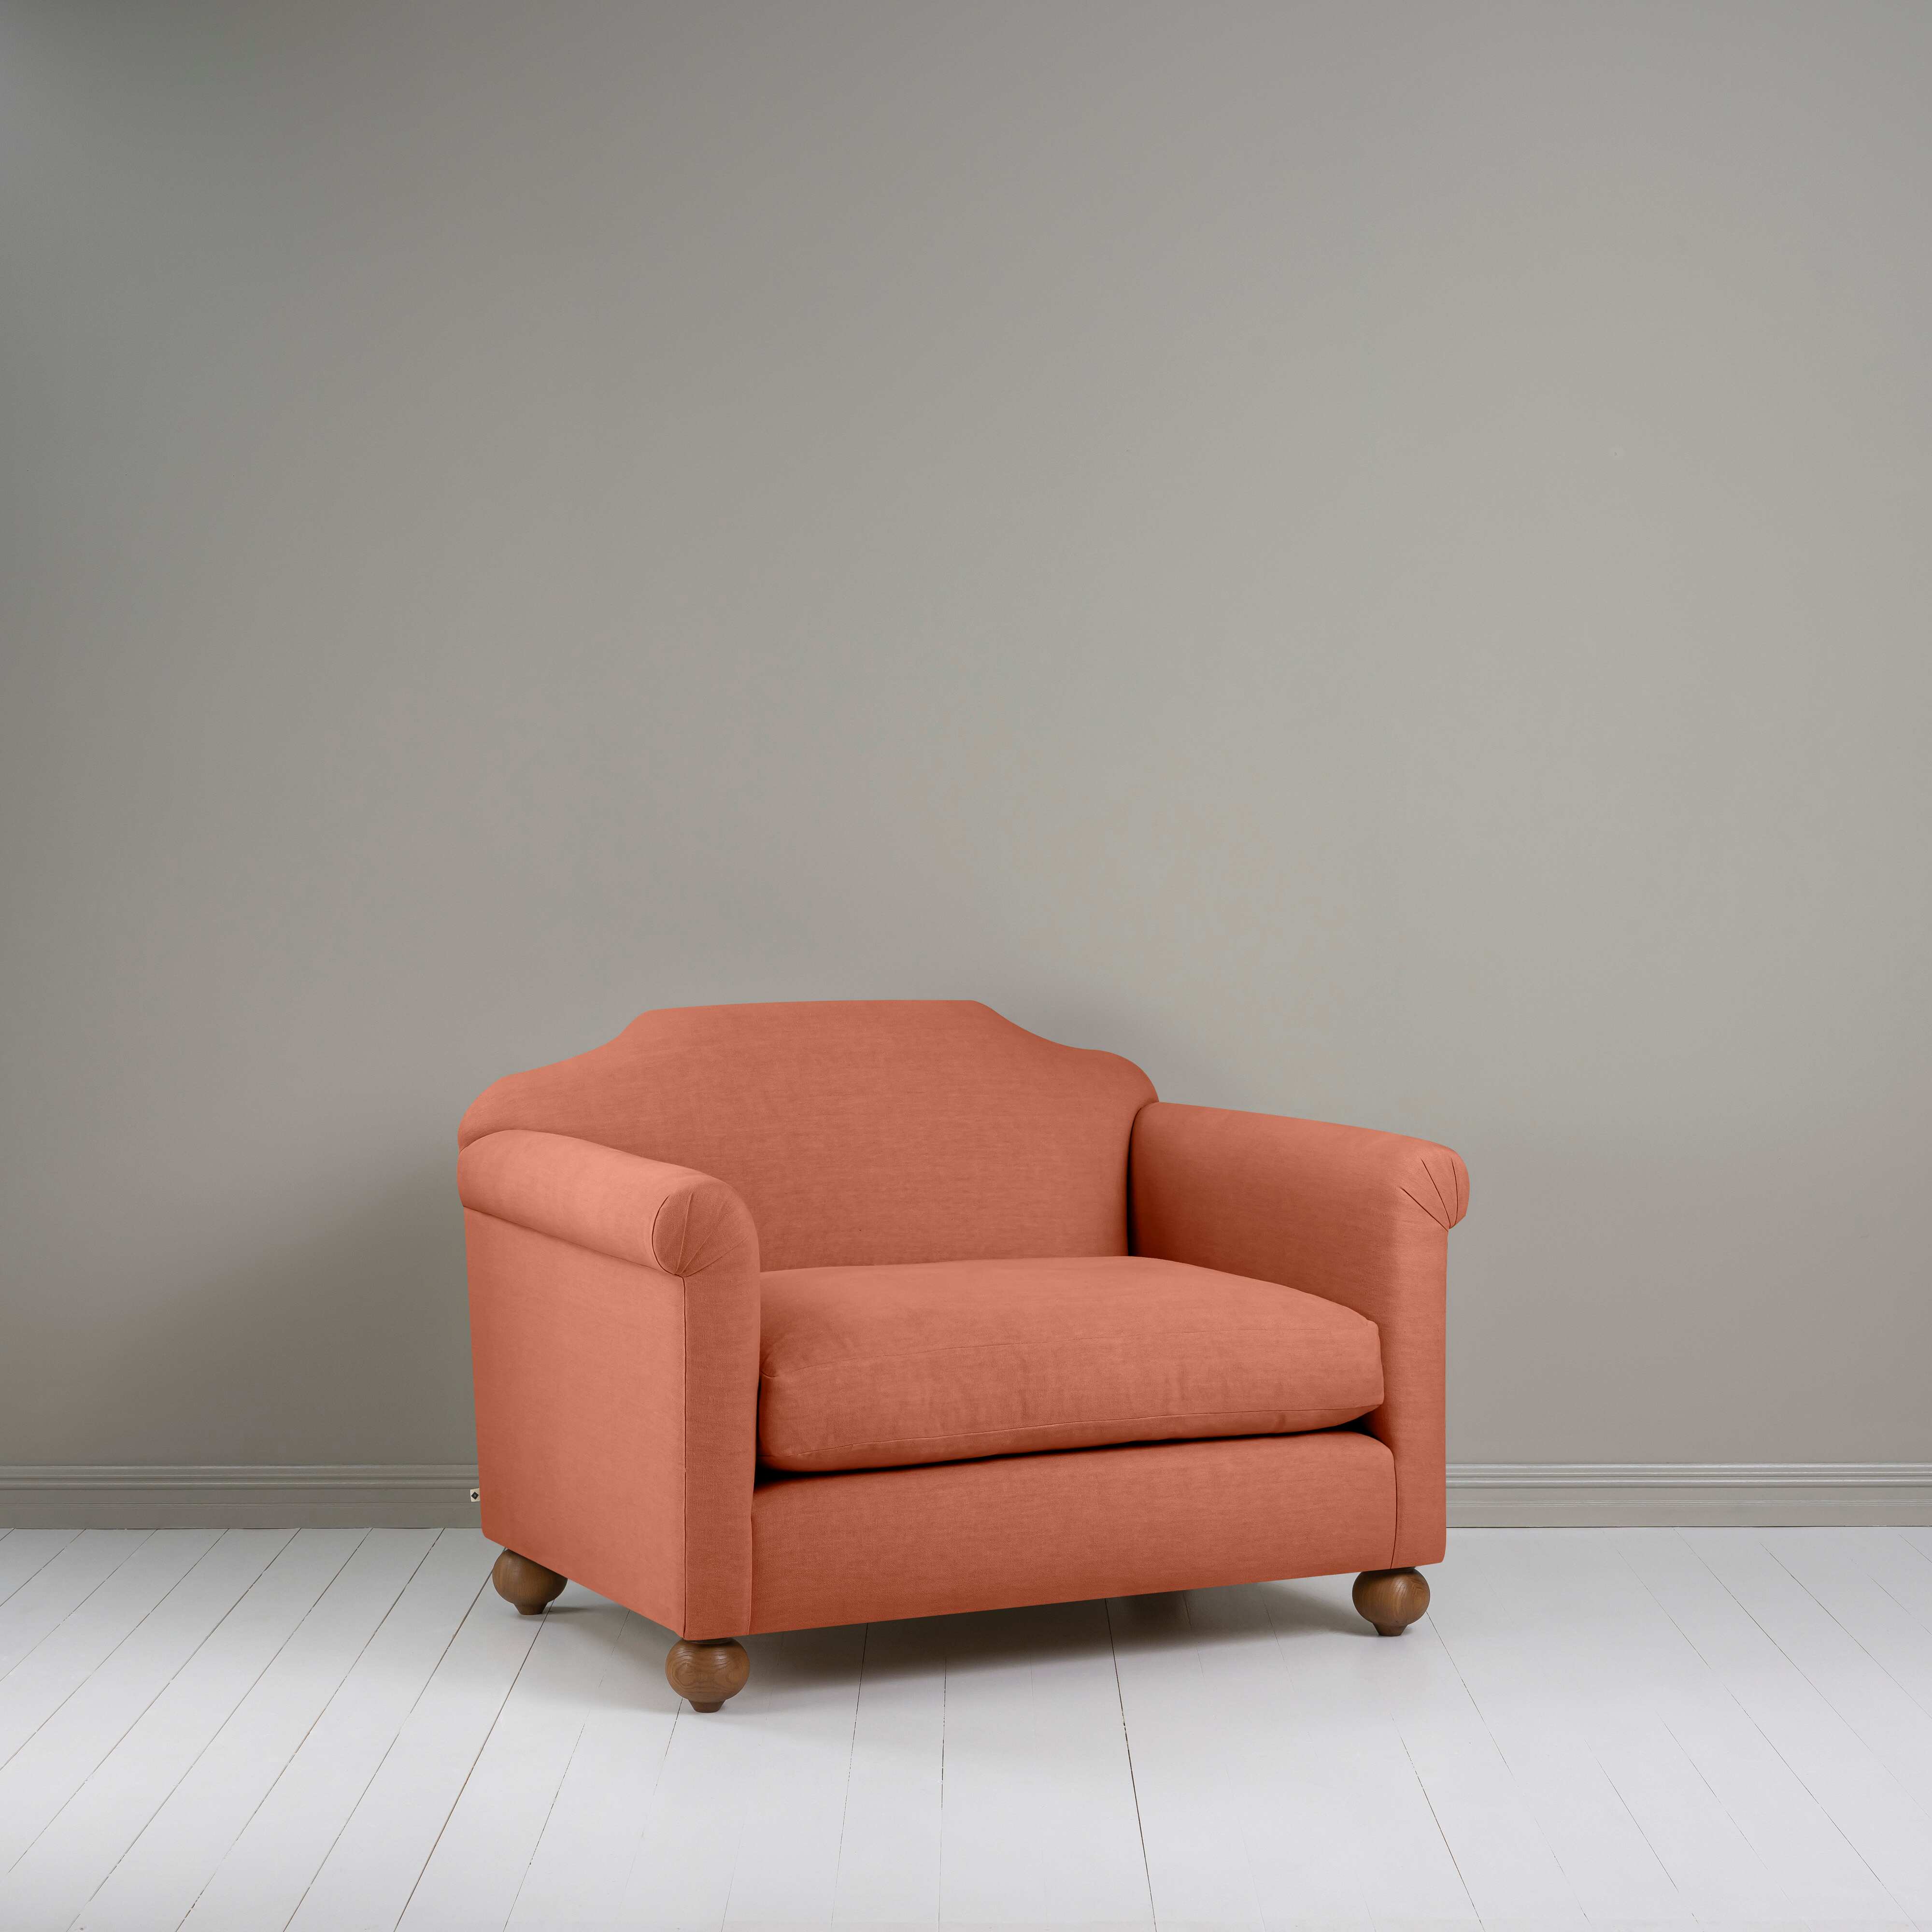  Dolittle Love Seat in Laidback Linen Cayenne 